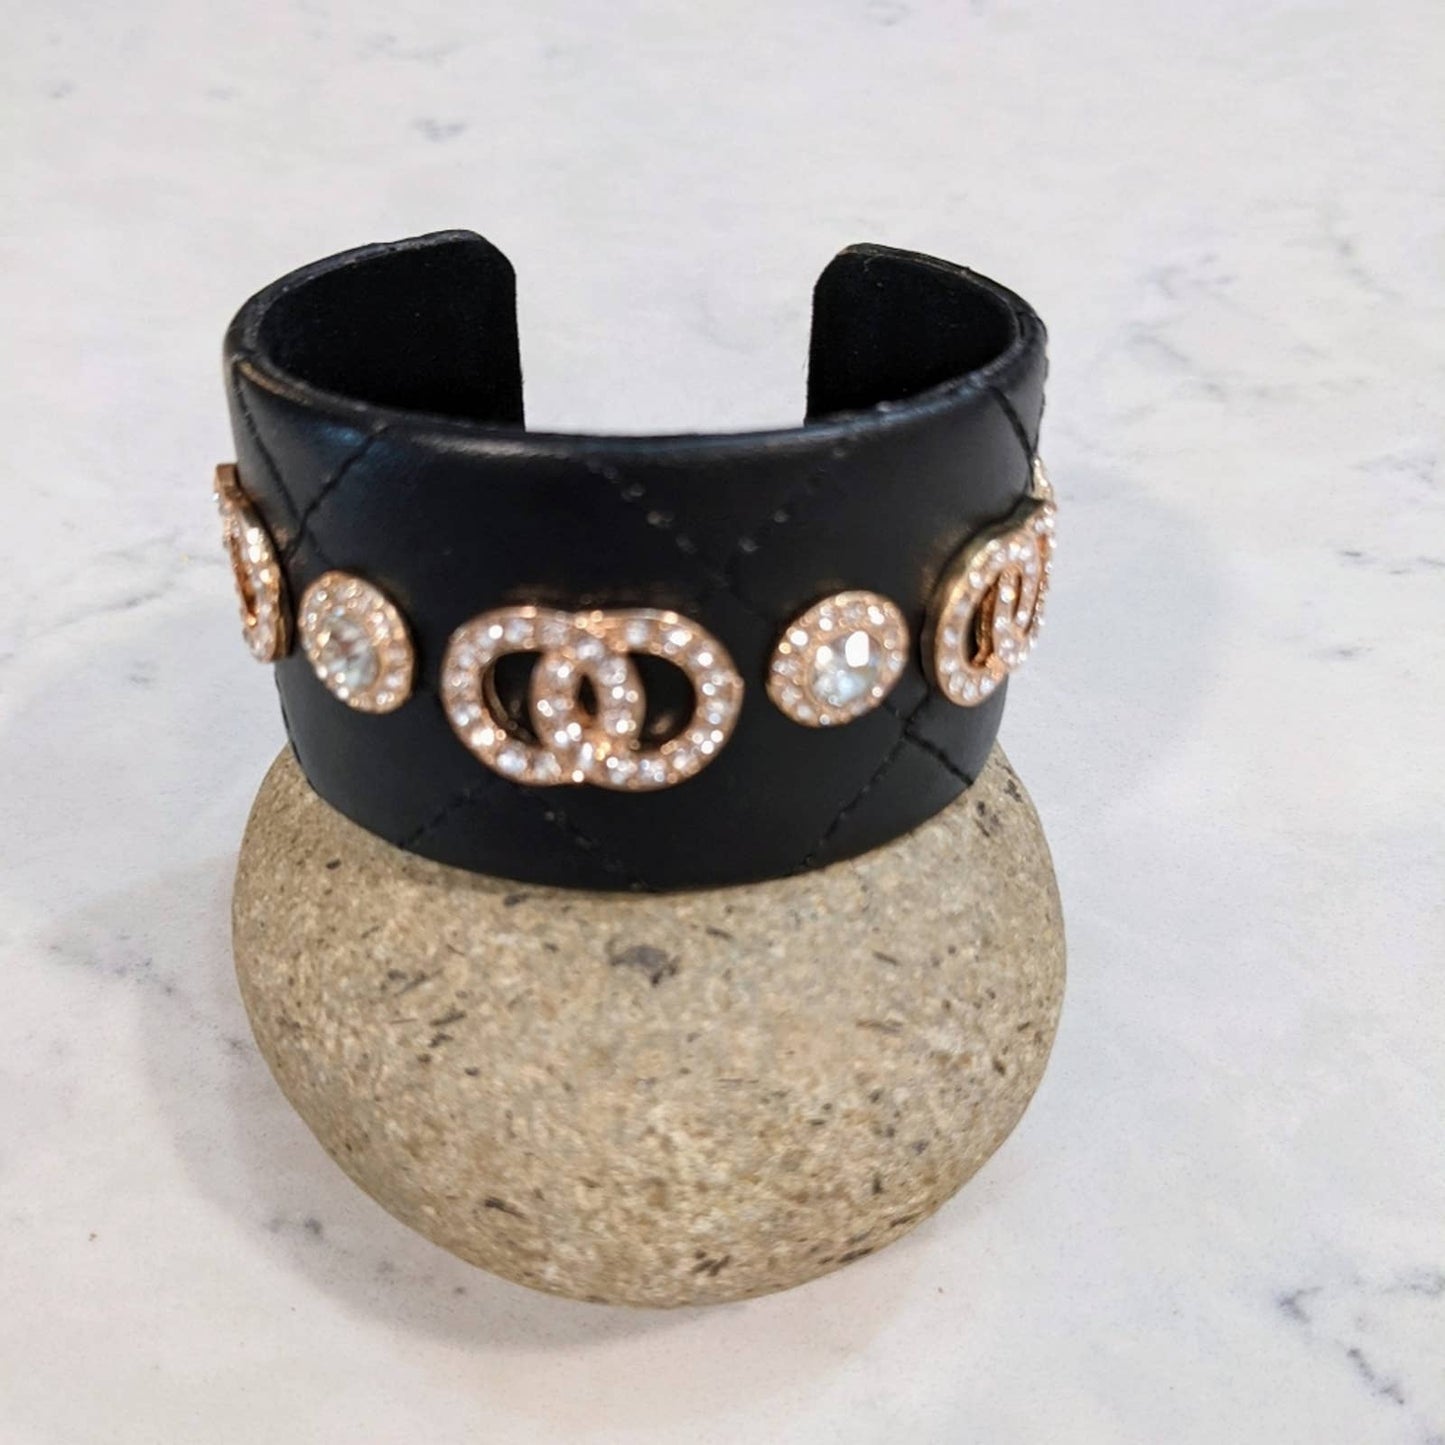 Quilted Bracelet Style Cuff Featuring Gold Tone Sparkle Interlocking Circles